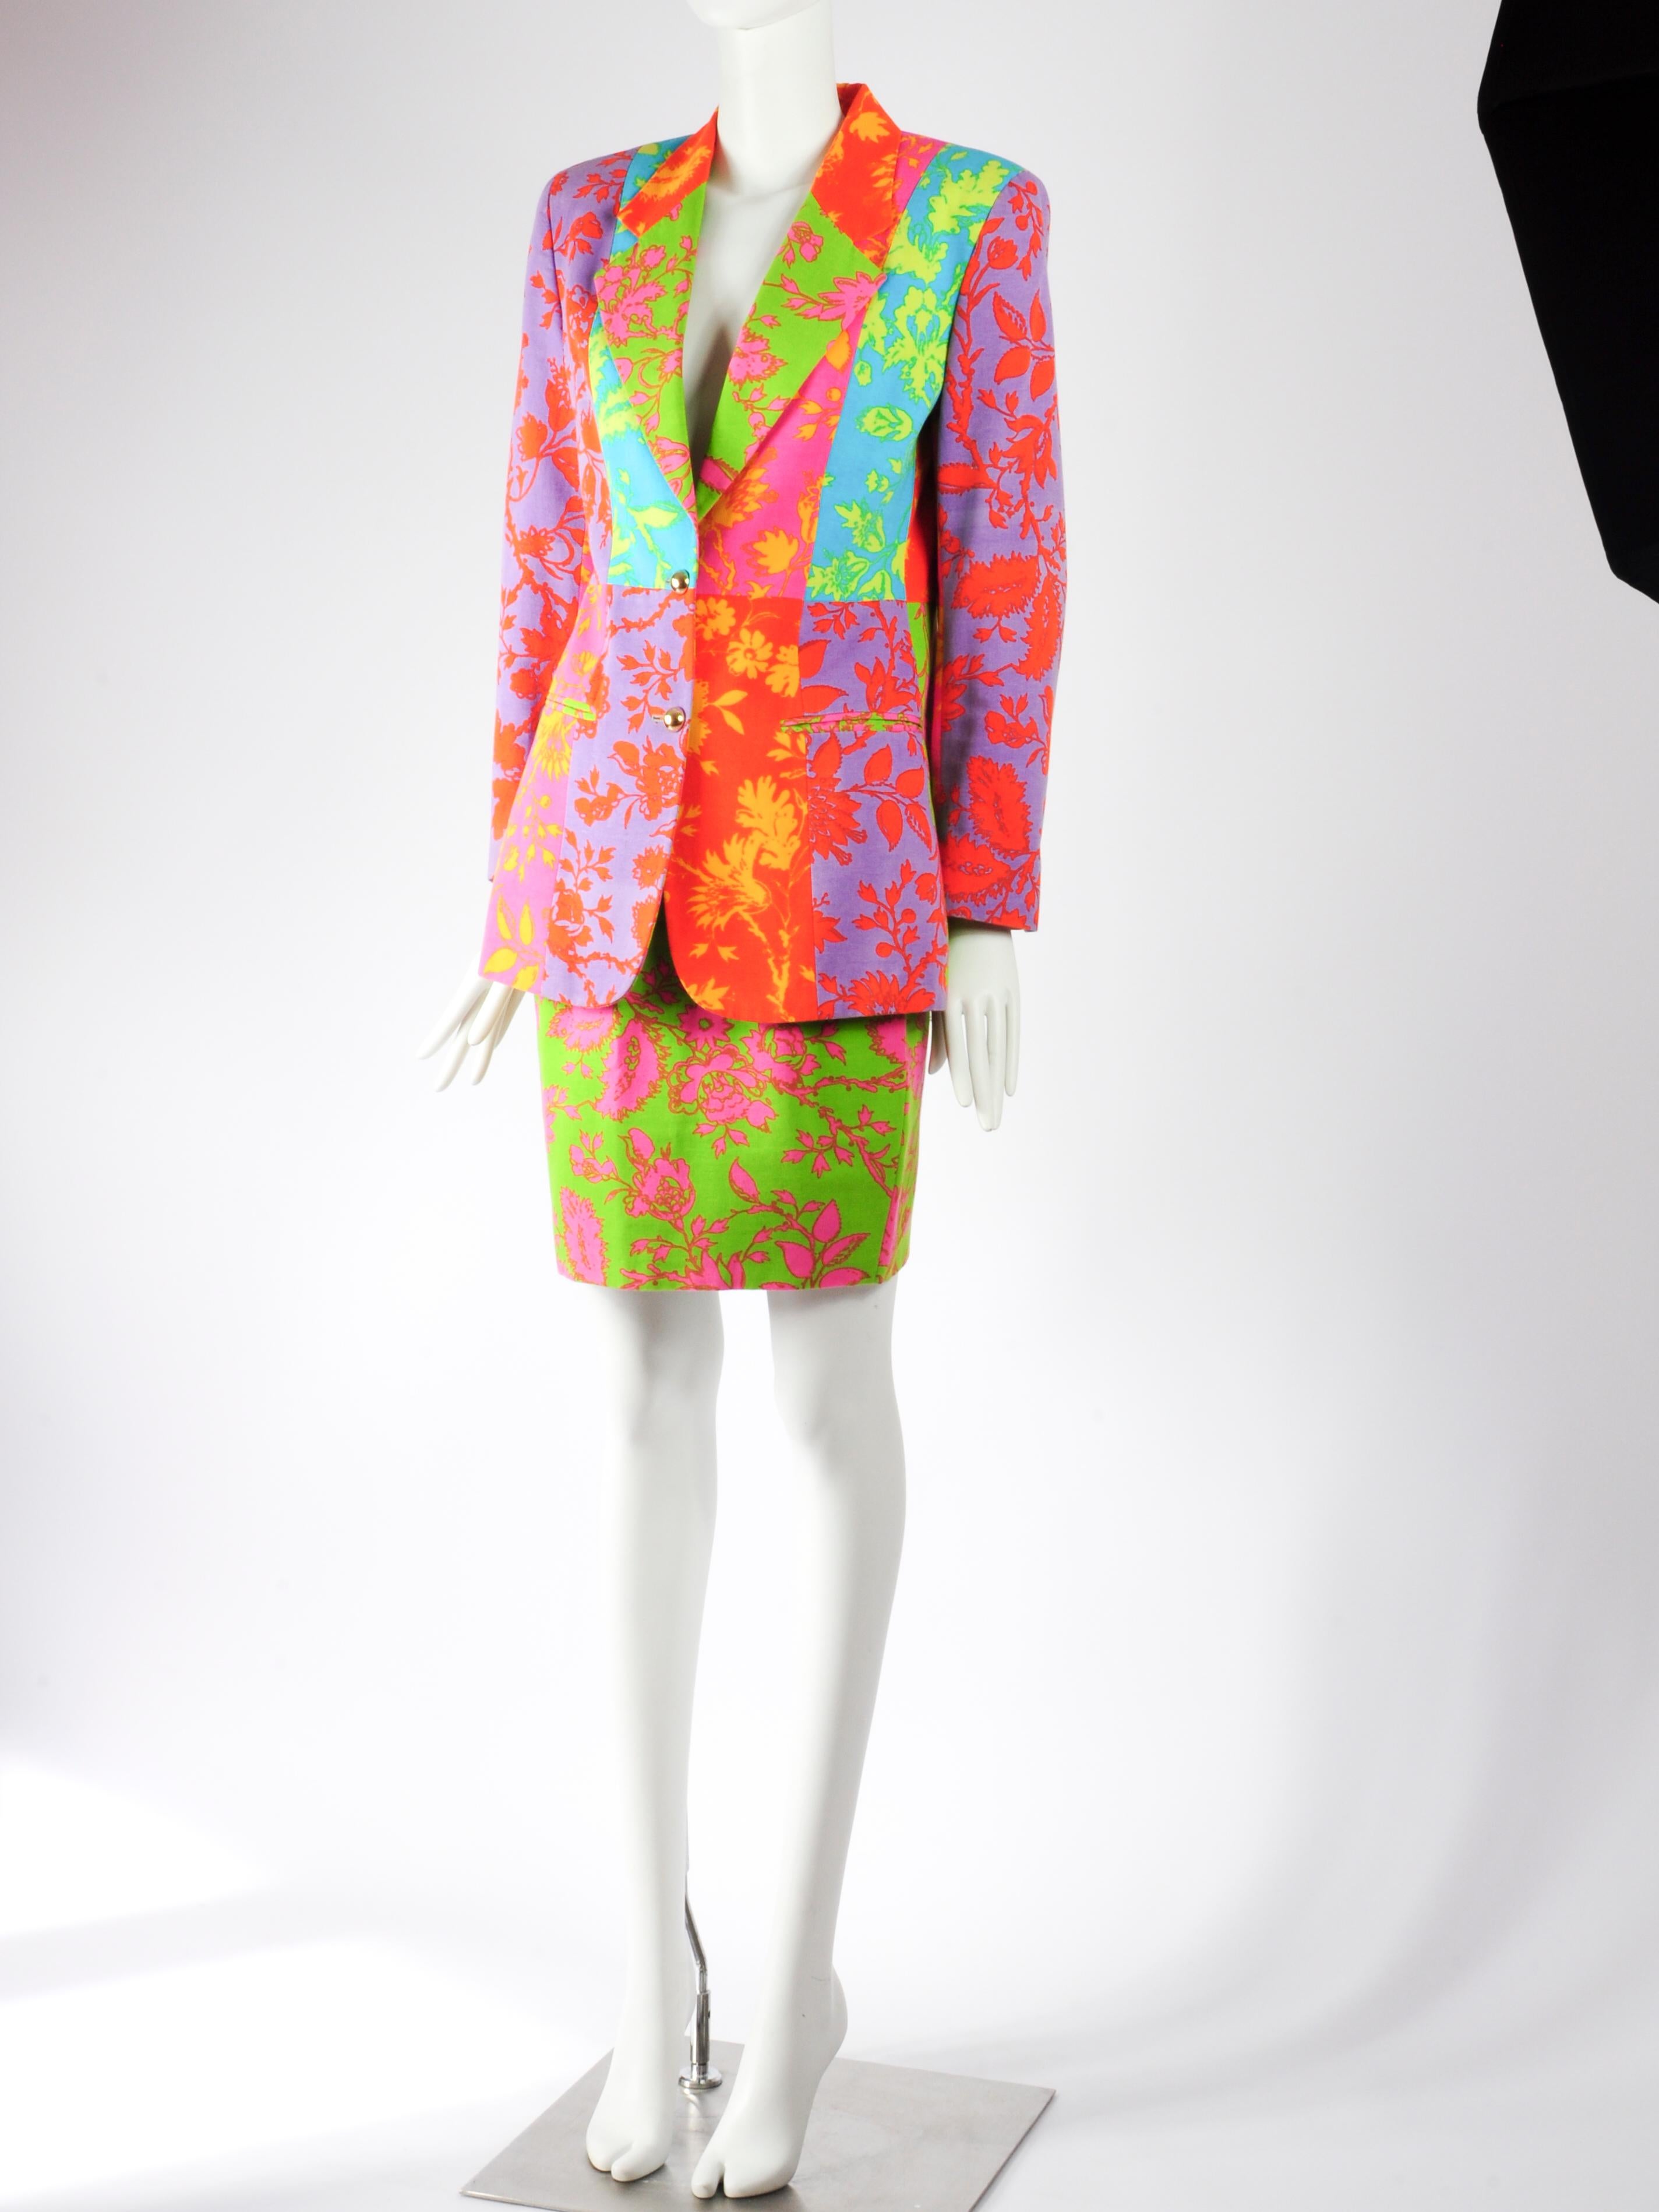 Brightly coloured, patchwork like, floral print Oliver by Valentino skirt suit is unlike anything I’ve ever seen from Valentino before. The skirt suit features the floral print in 5 different colour schemes and a matching skirt in lime green. There